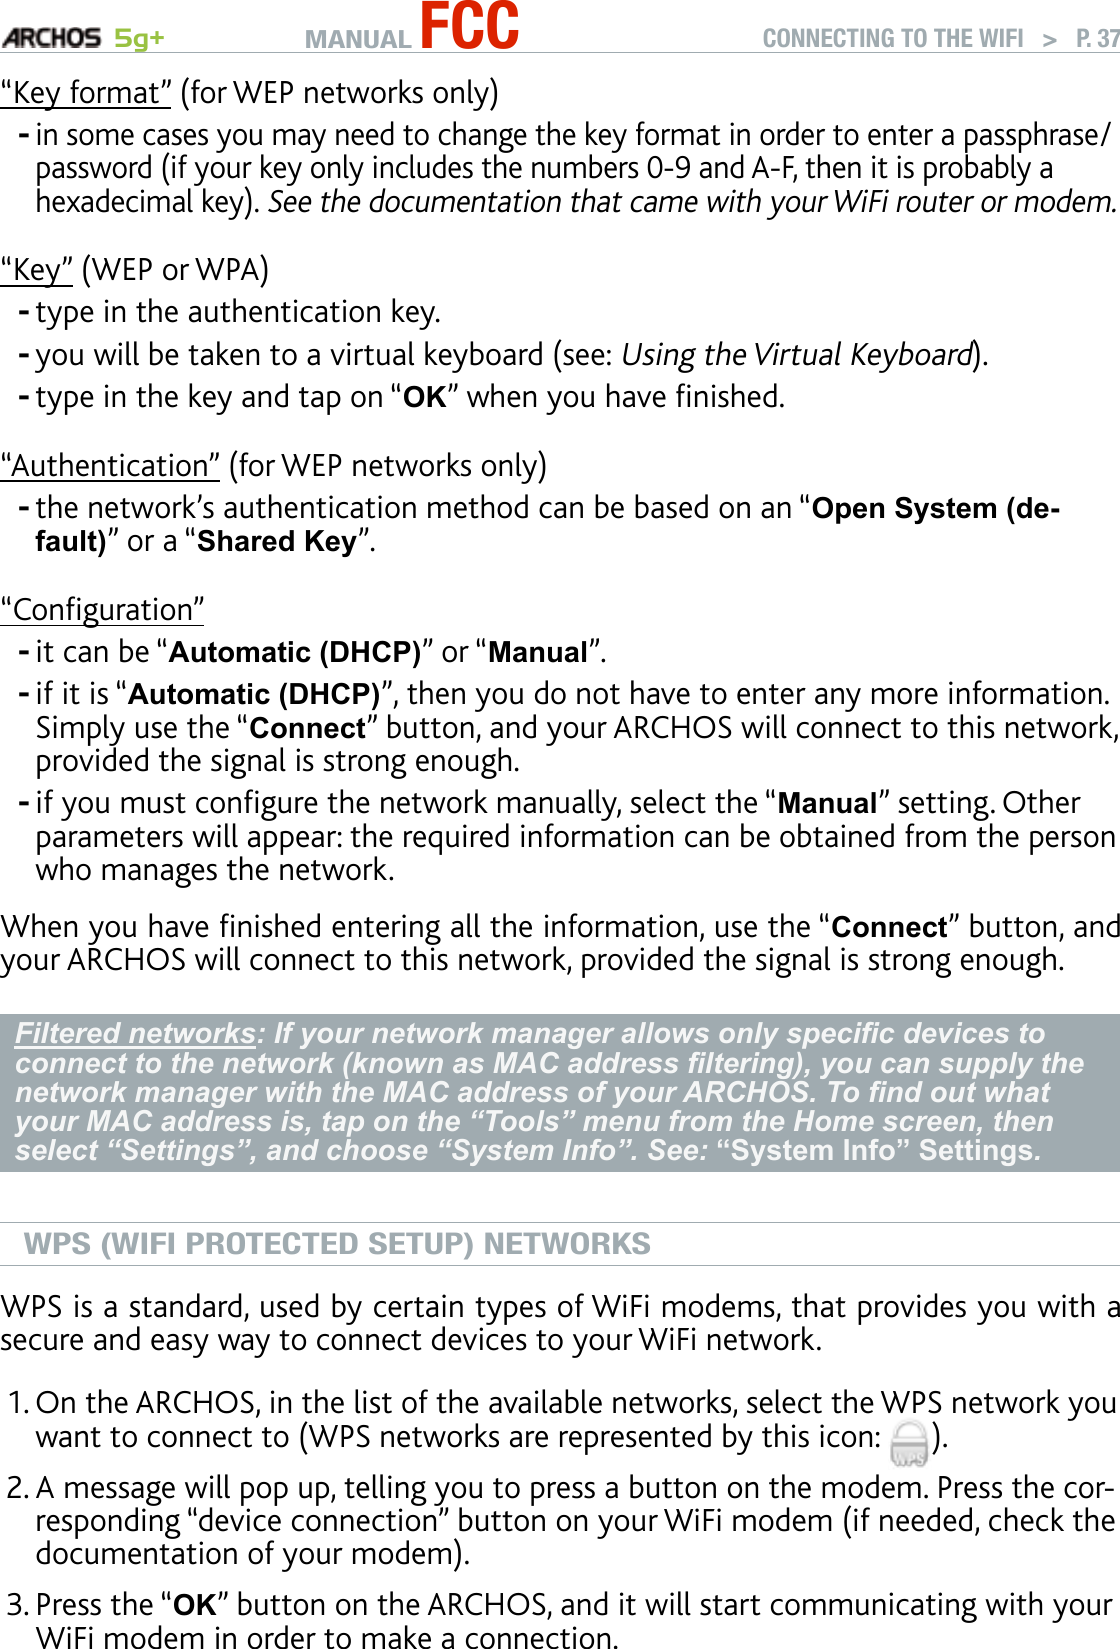 MANUAL FCC 5g+ CONNECTING TO THE WIFI   &gt;   P. 37“Key format” (for WEP networks only)in some cases you may need to change the key format in order to enter a passphrase/password (if your key only includes the numbers 0-9 and A-F, then it is probably a hexadecimal key). See the documentation that came with your WiFi router or modem.“Key” (WEP or WPA)type in the authentication key. you will be taken to a virtual keyboard (see: Using the Virtual Keyboard).type in the key and tap on “OK” when you have nished.“Authentication” (for WEP networks only)the network’s authentication method can be based on an “Open System (de-fault)” or a “Shared Key”.“Conguration”it can be “Automatic (DHCP)” or “Manual”.if it is “Automatic (DHCP)”, then you do not have to enter any more information. Simply use the “Connect” button, and your ARCHOS will connect to this network, provided the signal is strong enough.if you must congure the network manually, select the “Manual” setting. Other parameters will appear: the required information can be obtained from the person who manages the network.When you have nished entering all the information, use the “Connect” button, and your ARCHOS will connect to this network, provided the signal is strong enough.Filtered networks: If your network manager allows only specic devices to connect to the network (known as MAC address ltering), you can supply the network manager with the MAC address of your ARCHOS. To nd out what your MAC address is, tap on the “Tools” menu from the Home screen, then select “Settings”, and choose “System Info”. See: “System Info” Settings.WPS (WIFI PROTECTED SETUP) NETWORKSWPS is a standard, used by certain types of WiFi modems, that provides you with a secure and easy way to connect devices to your WiFi network. On the ARCHOS, in the list of the available networks, select the WPS network you want to connect to (WPS networks are represented by this icon:  ). A message will pop up, telling you to press a button on the modem. Press the cor-responding “device connection” button on your WiFi modem (if needed, check the documentation of your modem).Press the “OK” button on the ARCHOS, and it will start communicating with your WiFi modem in order to make a connection.--------1.2.3.